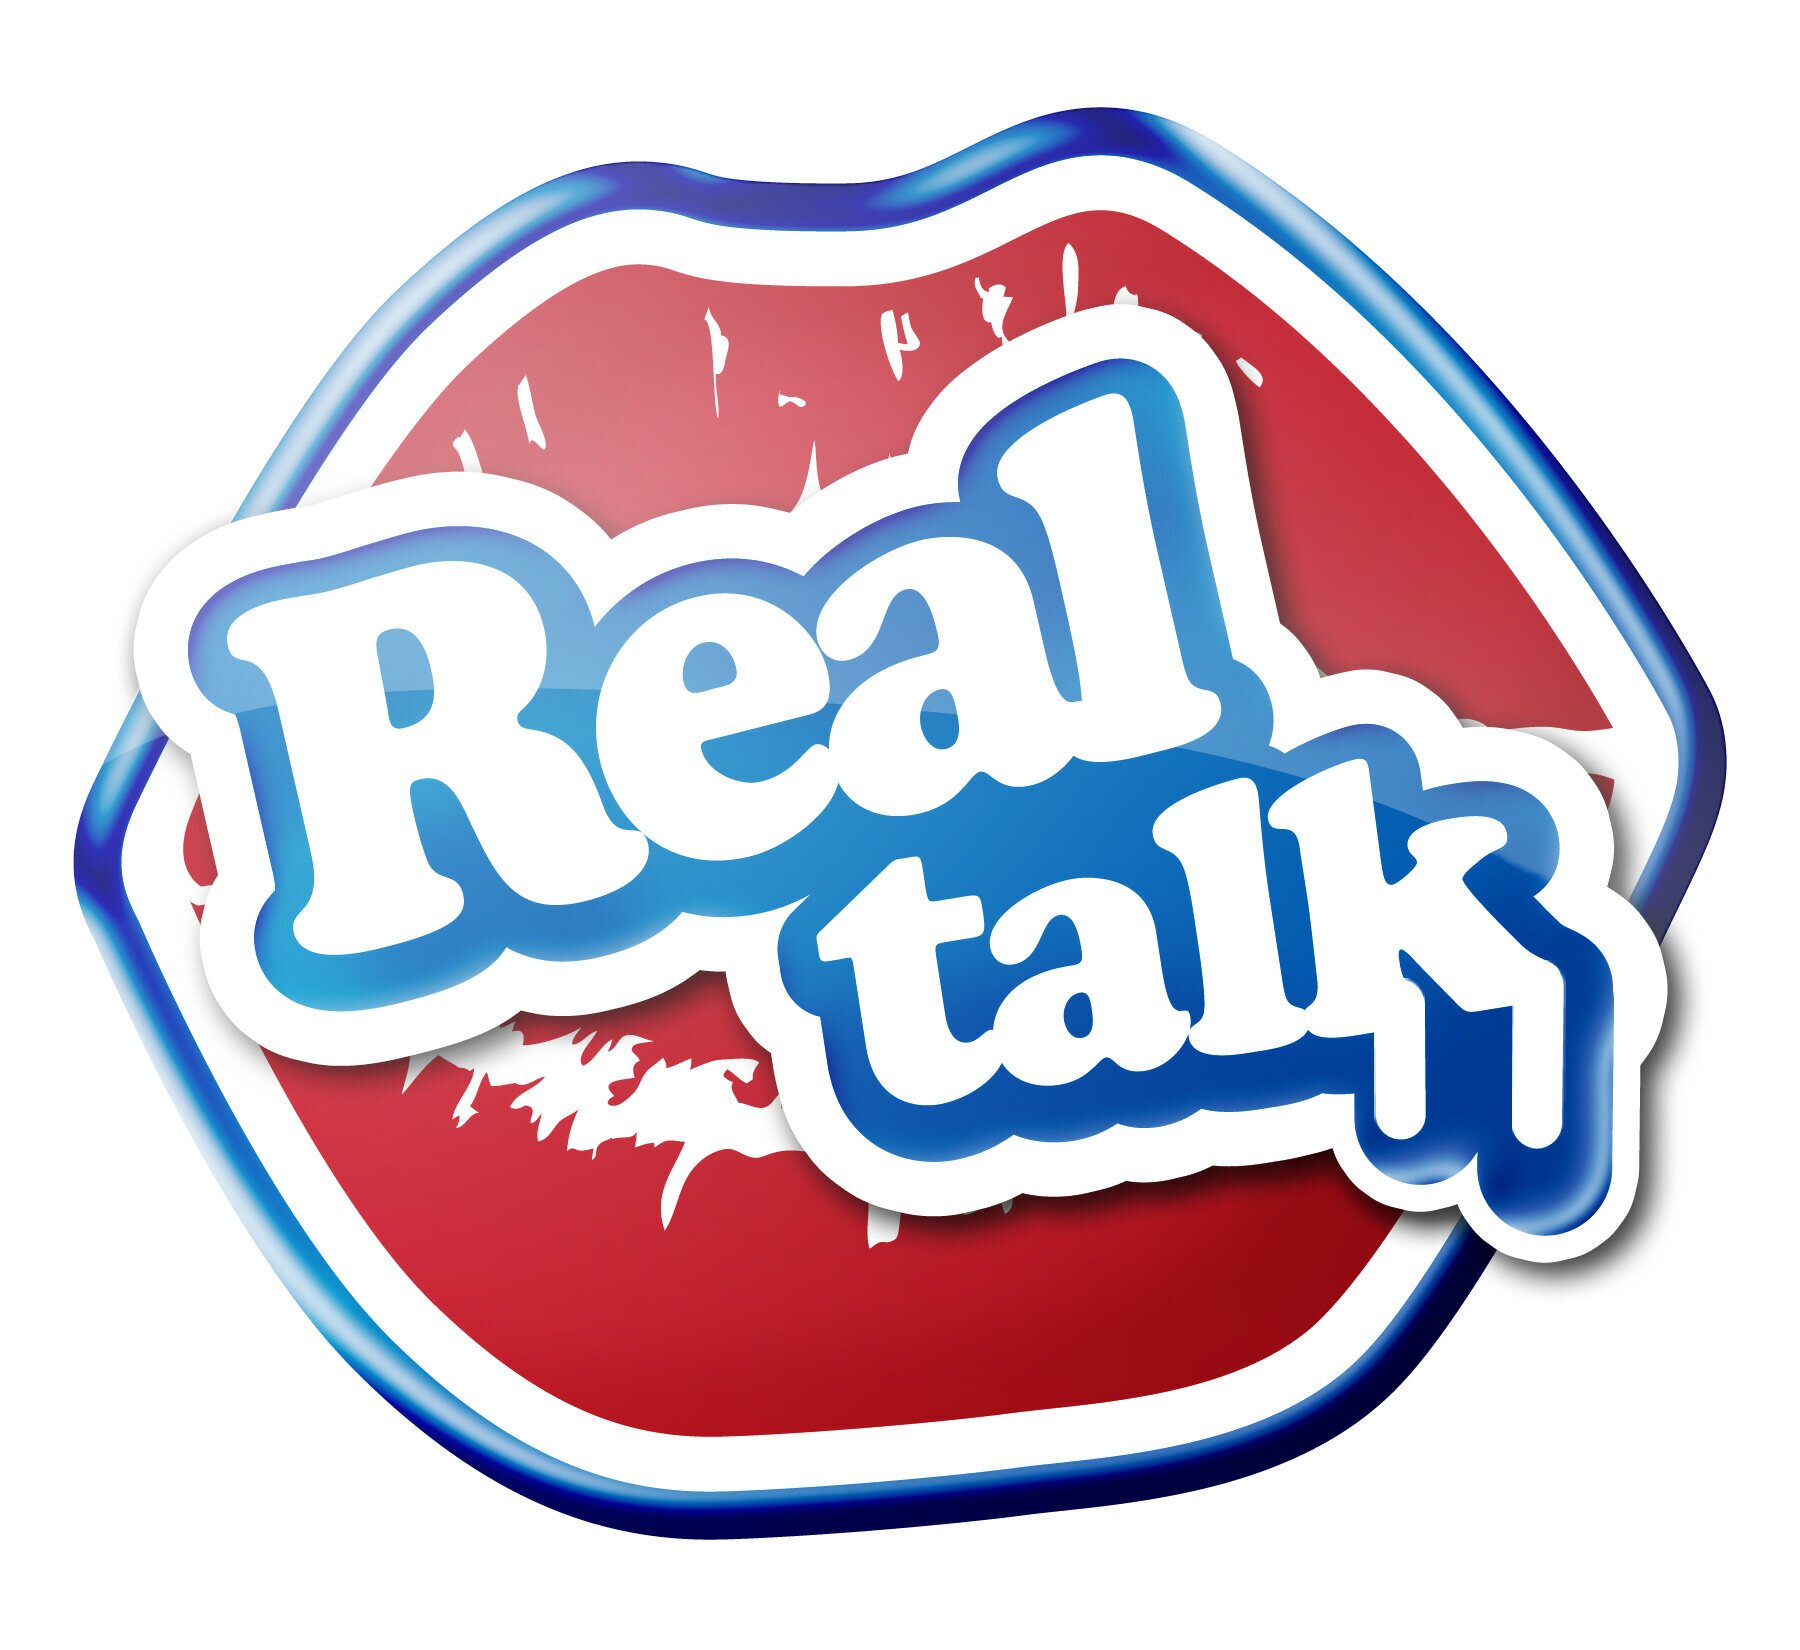 Tweet us your realtalk posts and we will retweet it. We retweet to share :) Started on: May 9, 2014